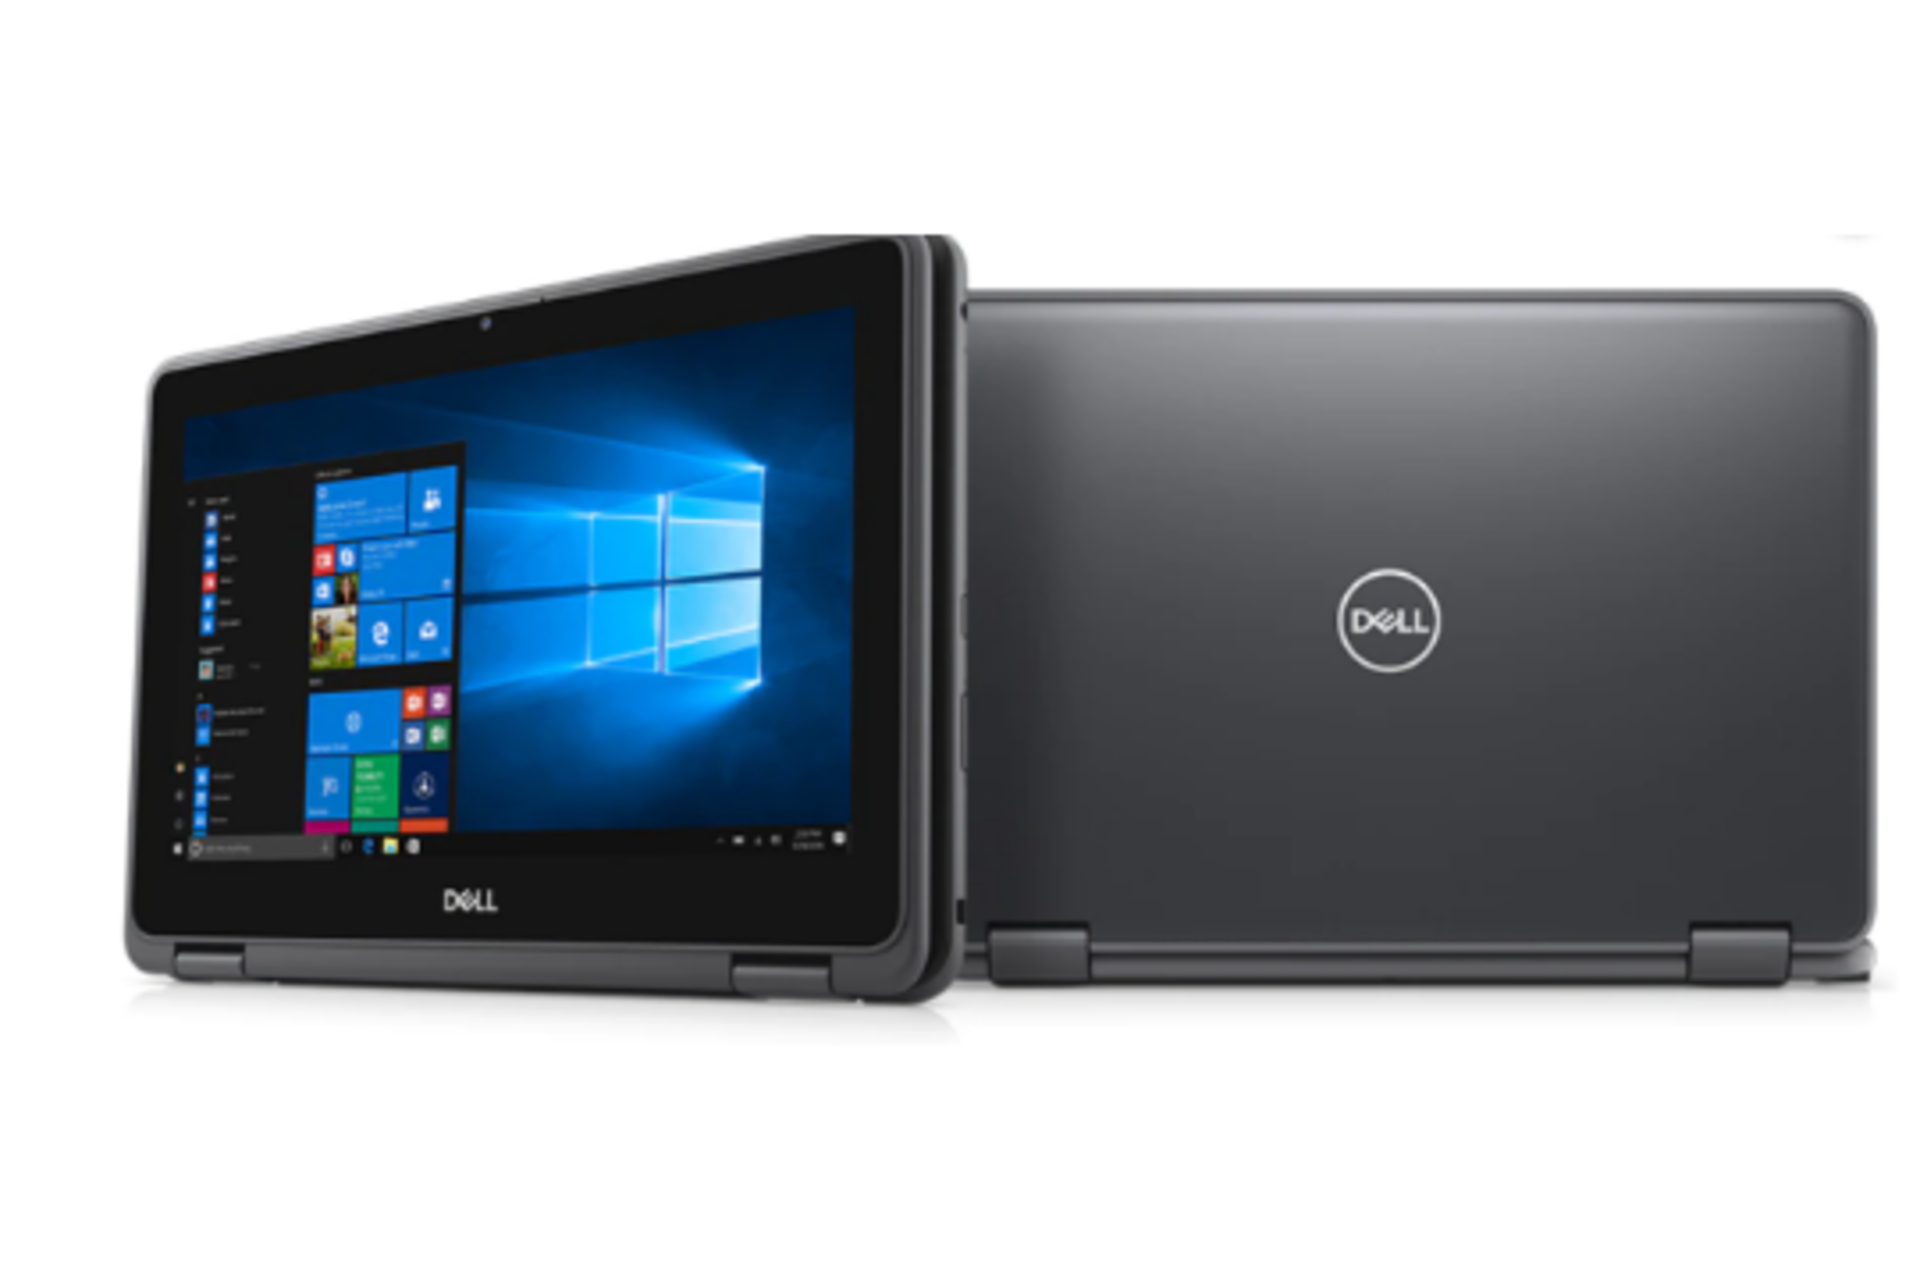 NEW DELL LATITUDE 3190 TWO IN ONE LAPTOP TABLET RRP £495 EACH - Image 4 of 5